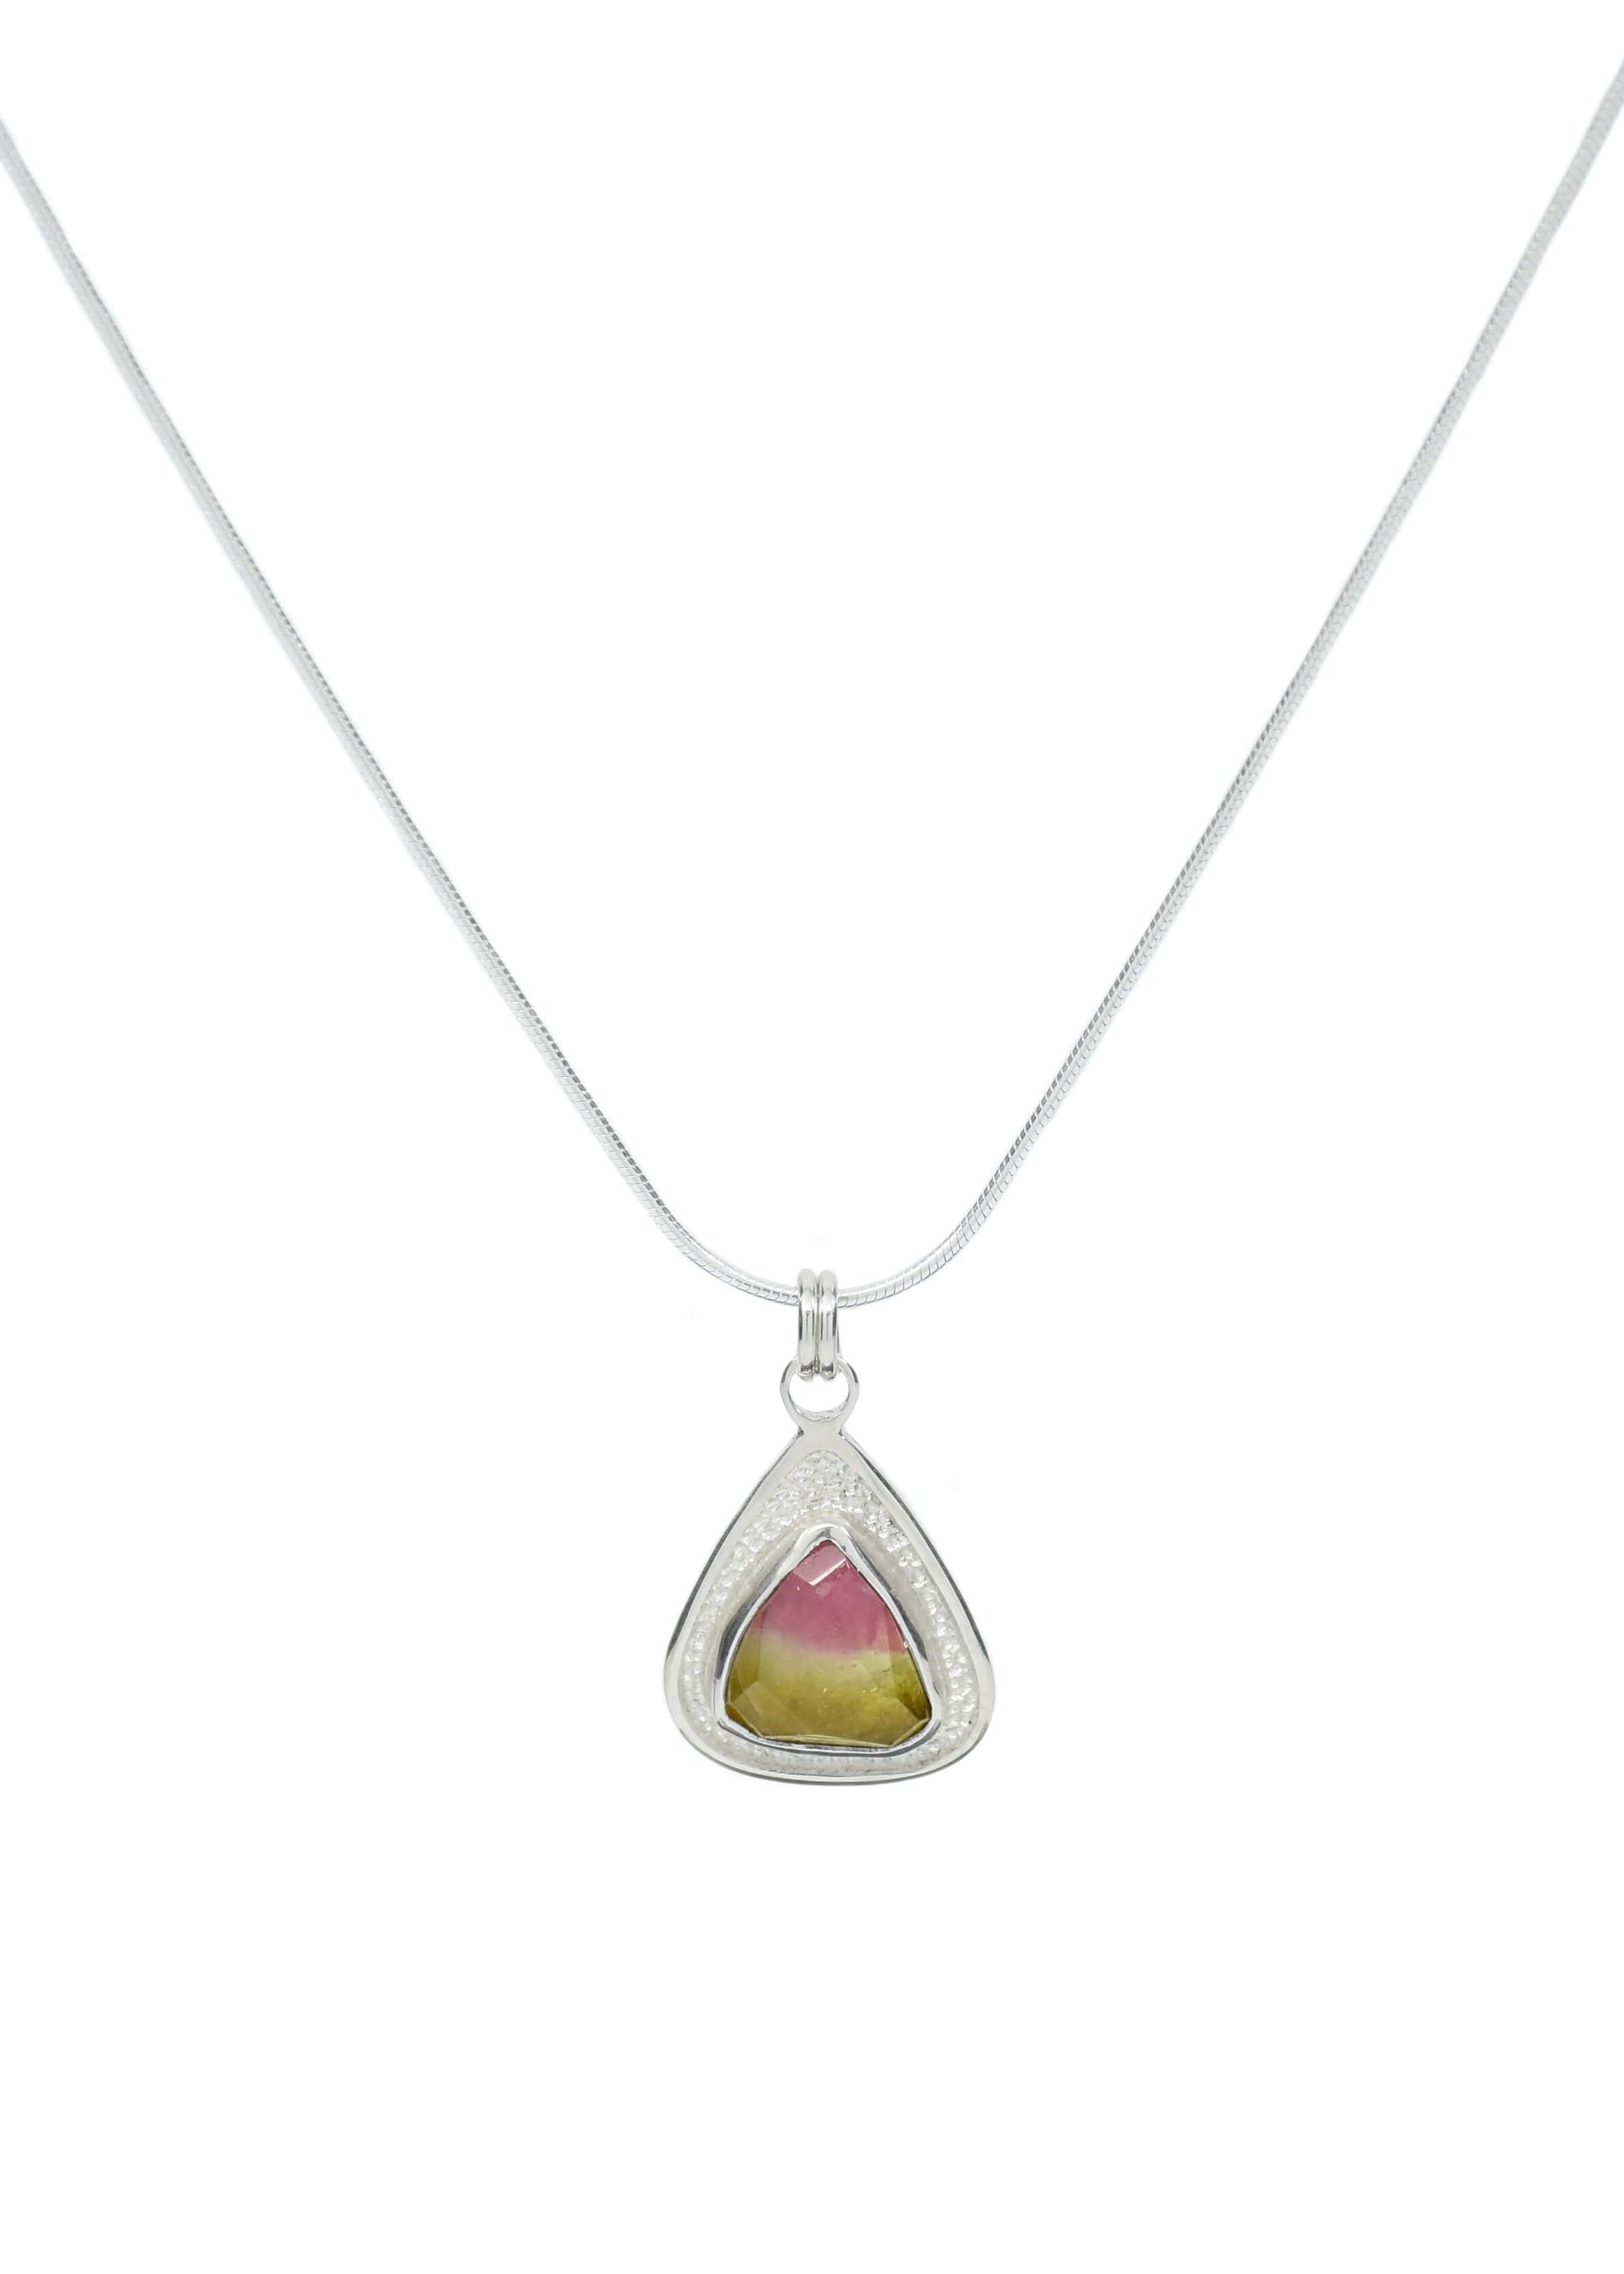 A sterling silver rose cut tourmaline pendant on silver chain